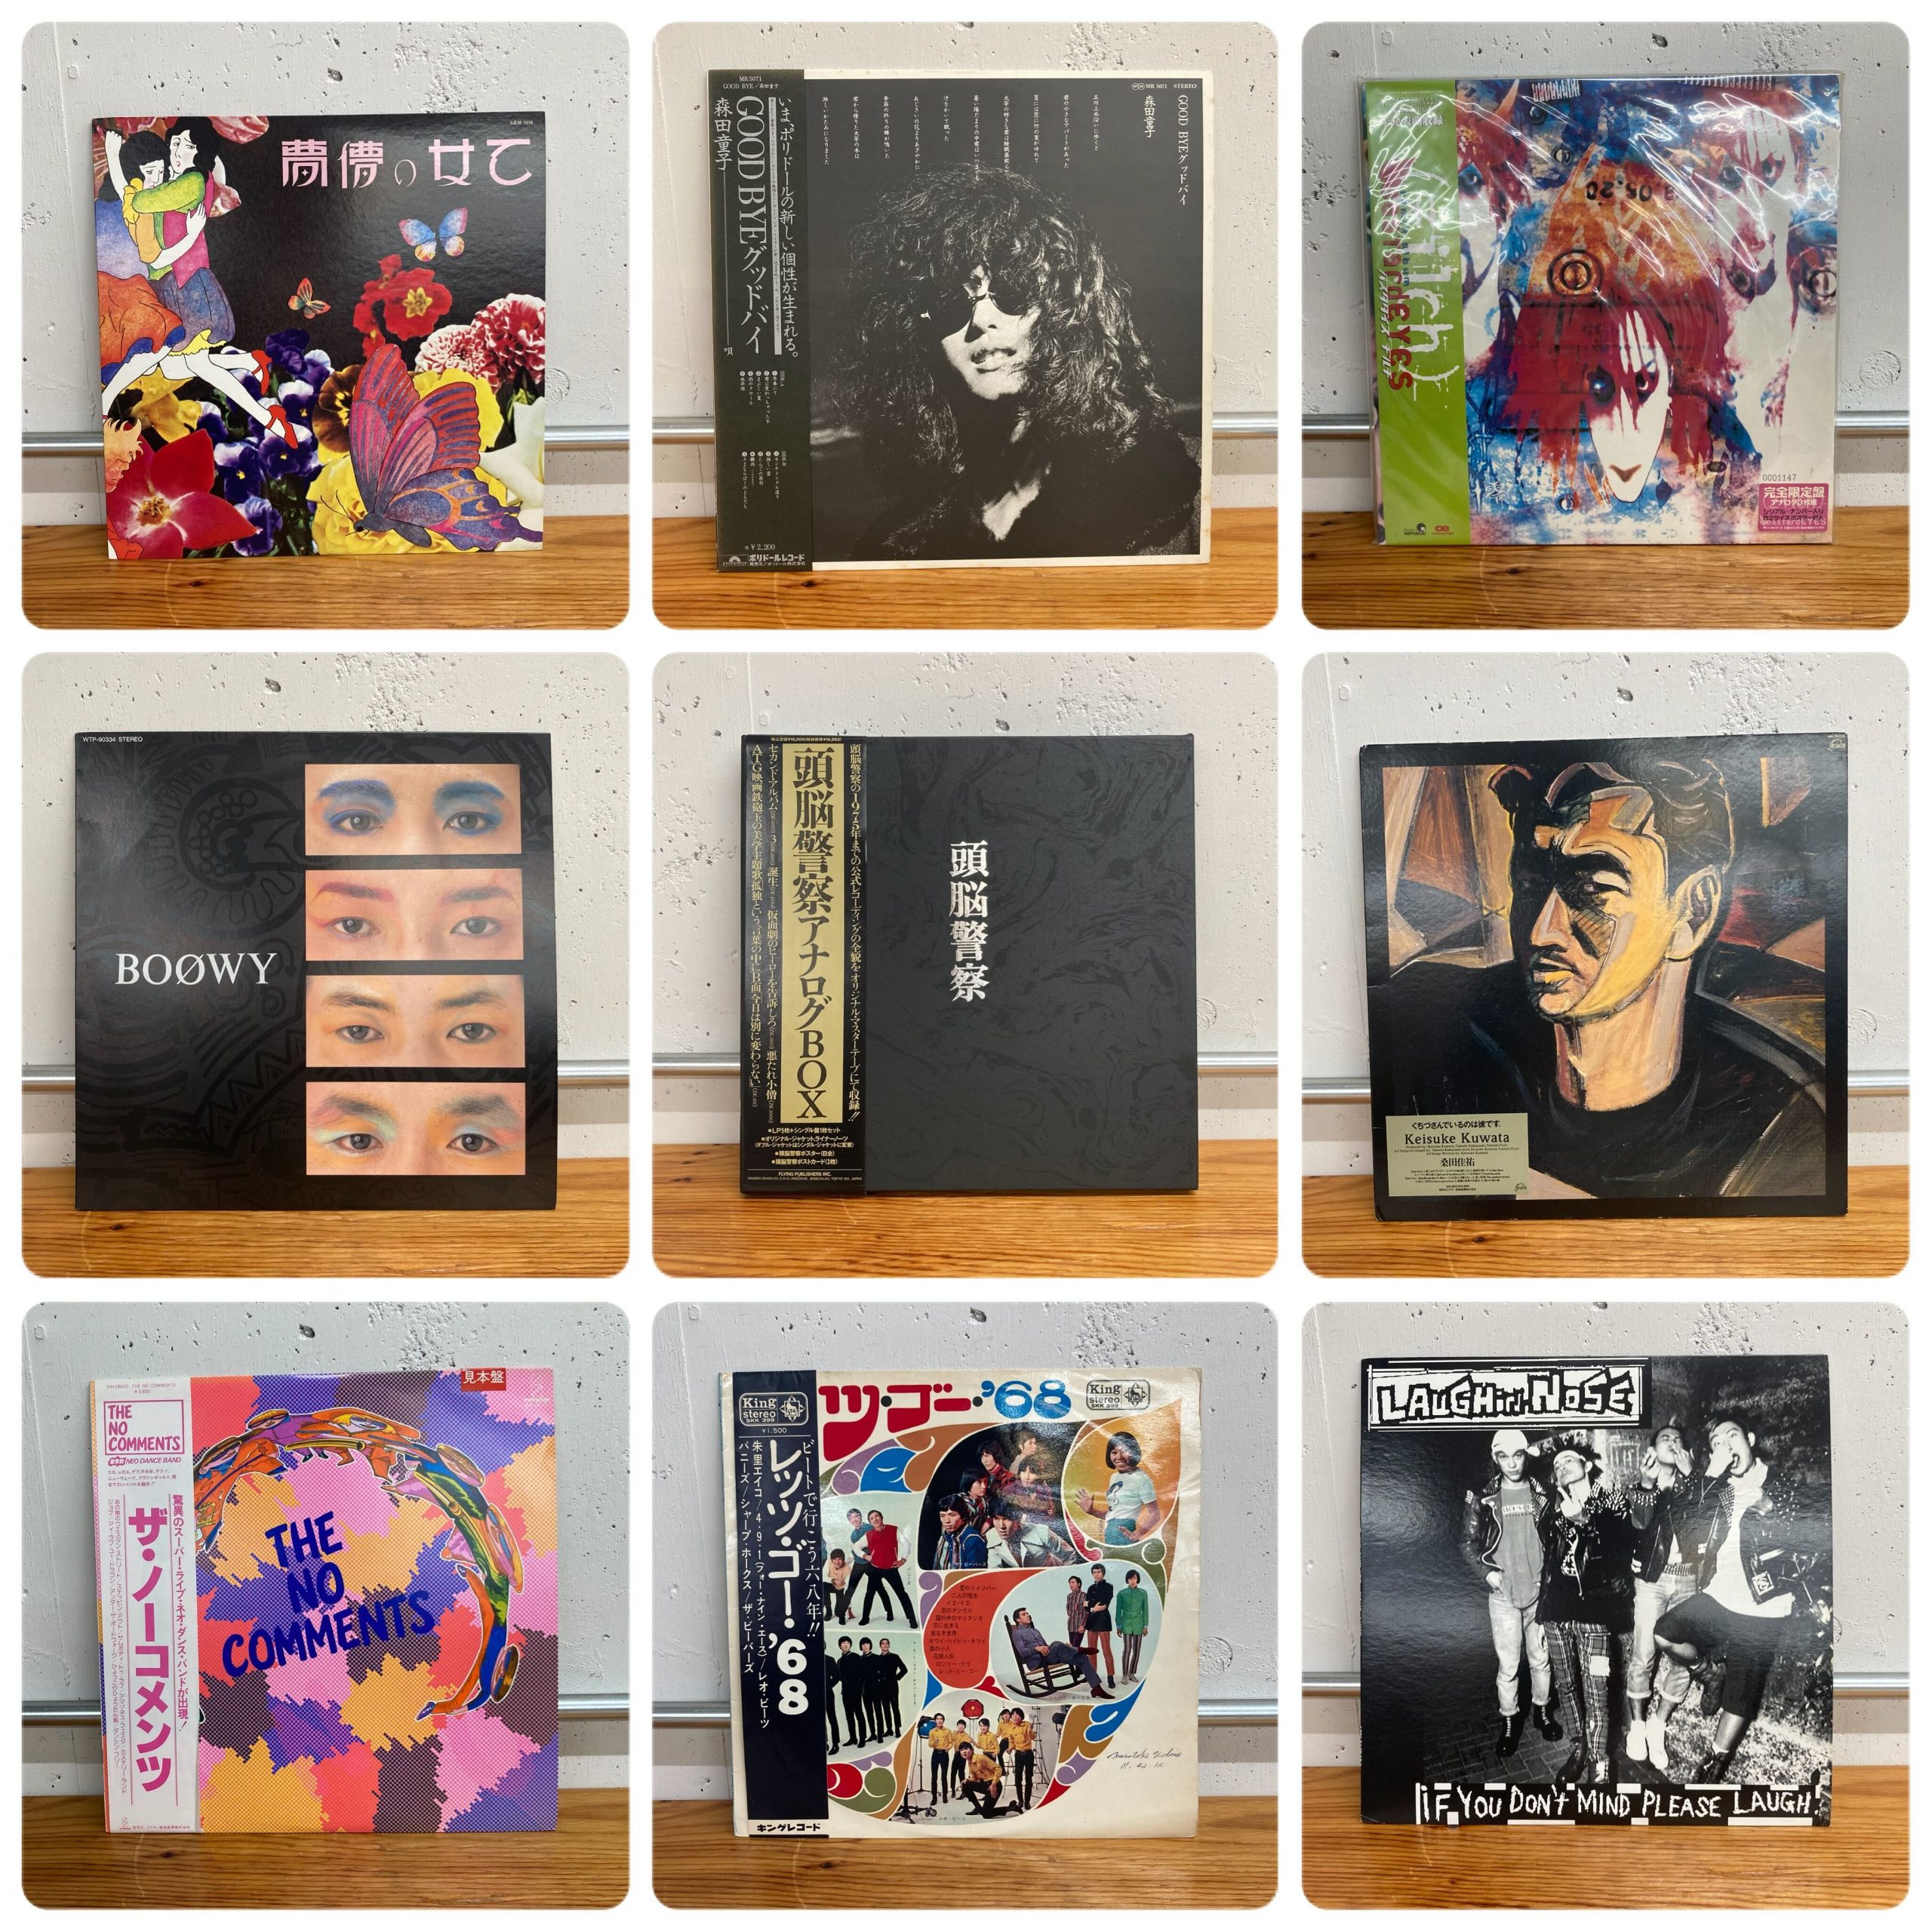 2022/12/10 (SAT) JAPANESE LP & 7INCH SALE – General Record Store